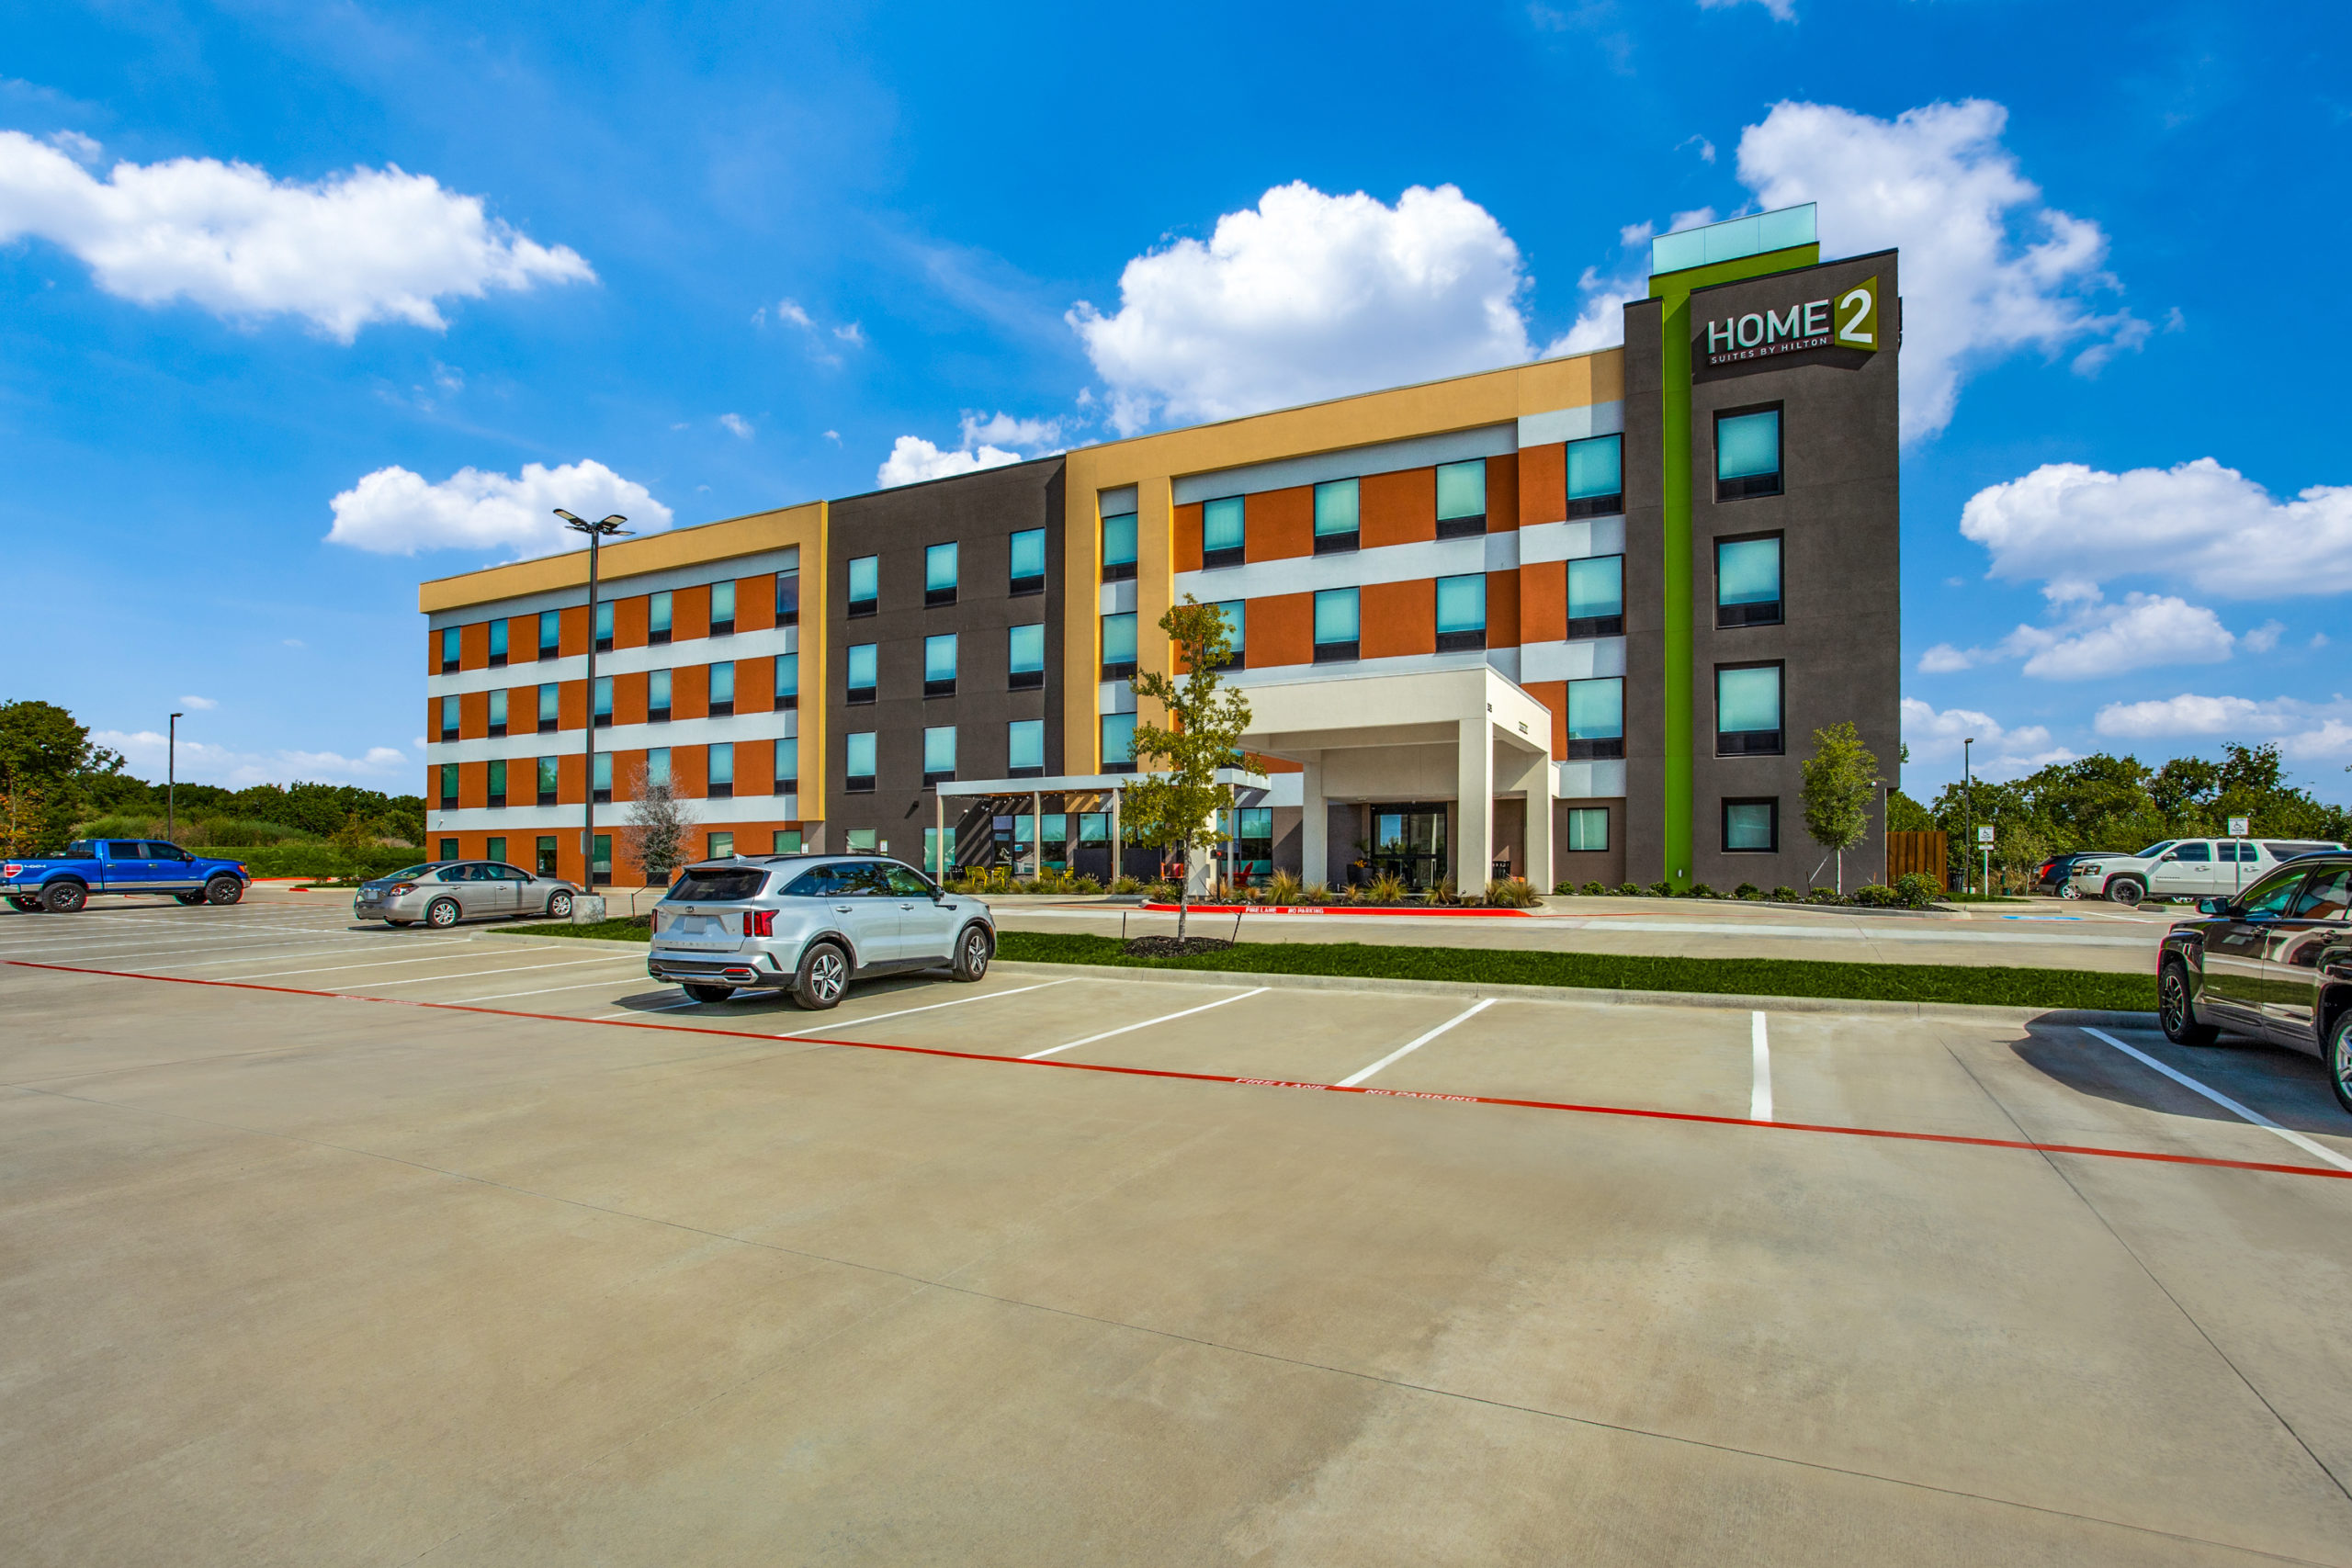 Home2 Suites Plano North - Hwy 75 exterior